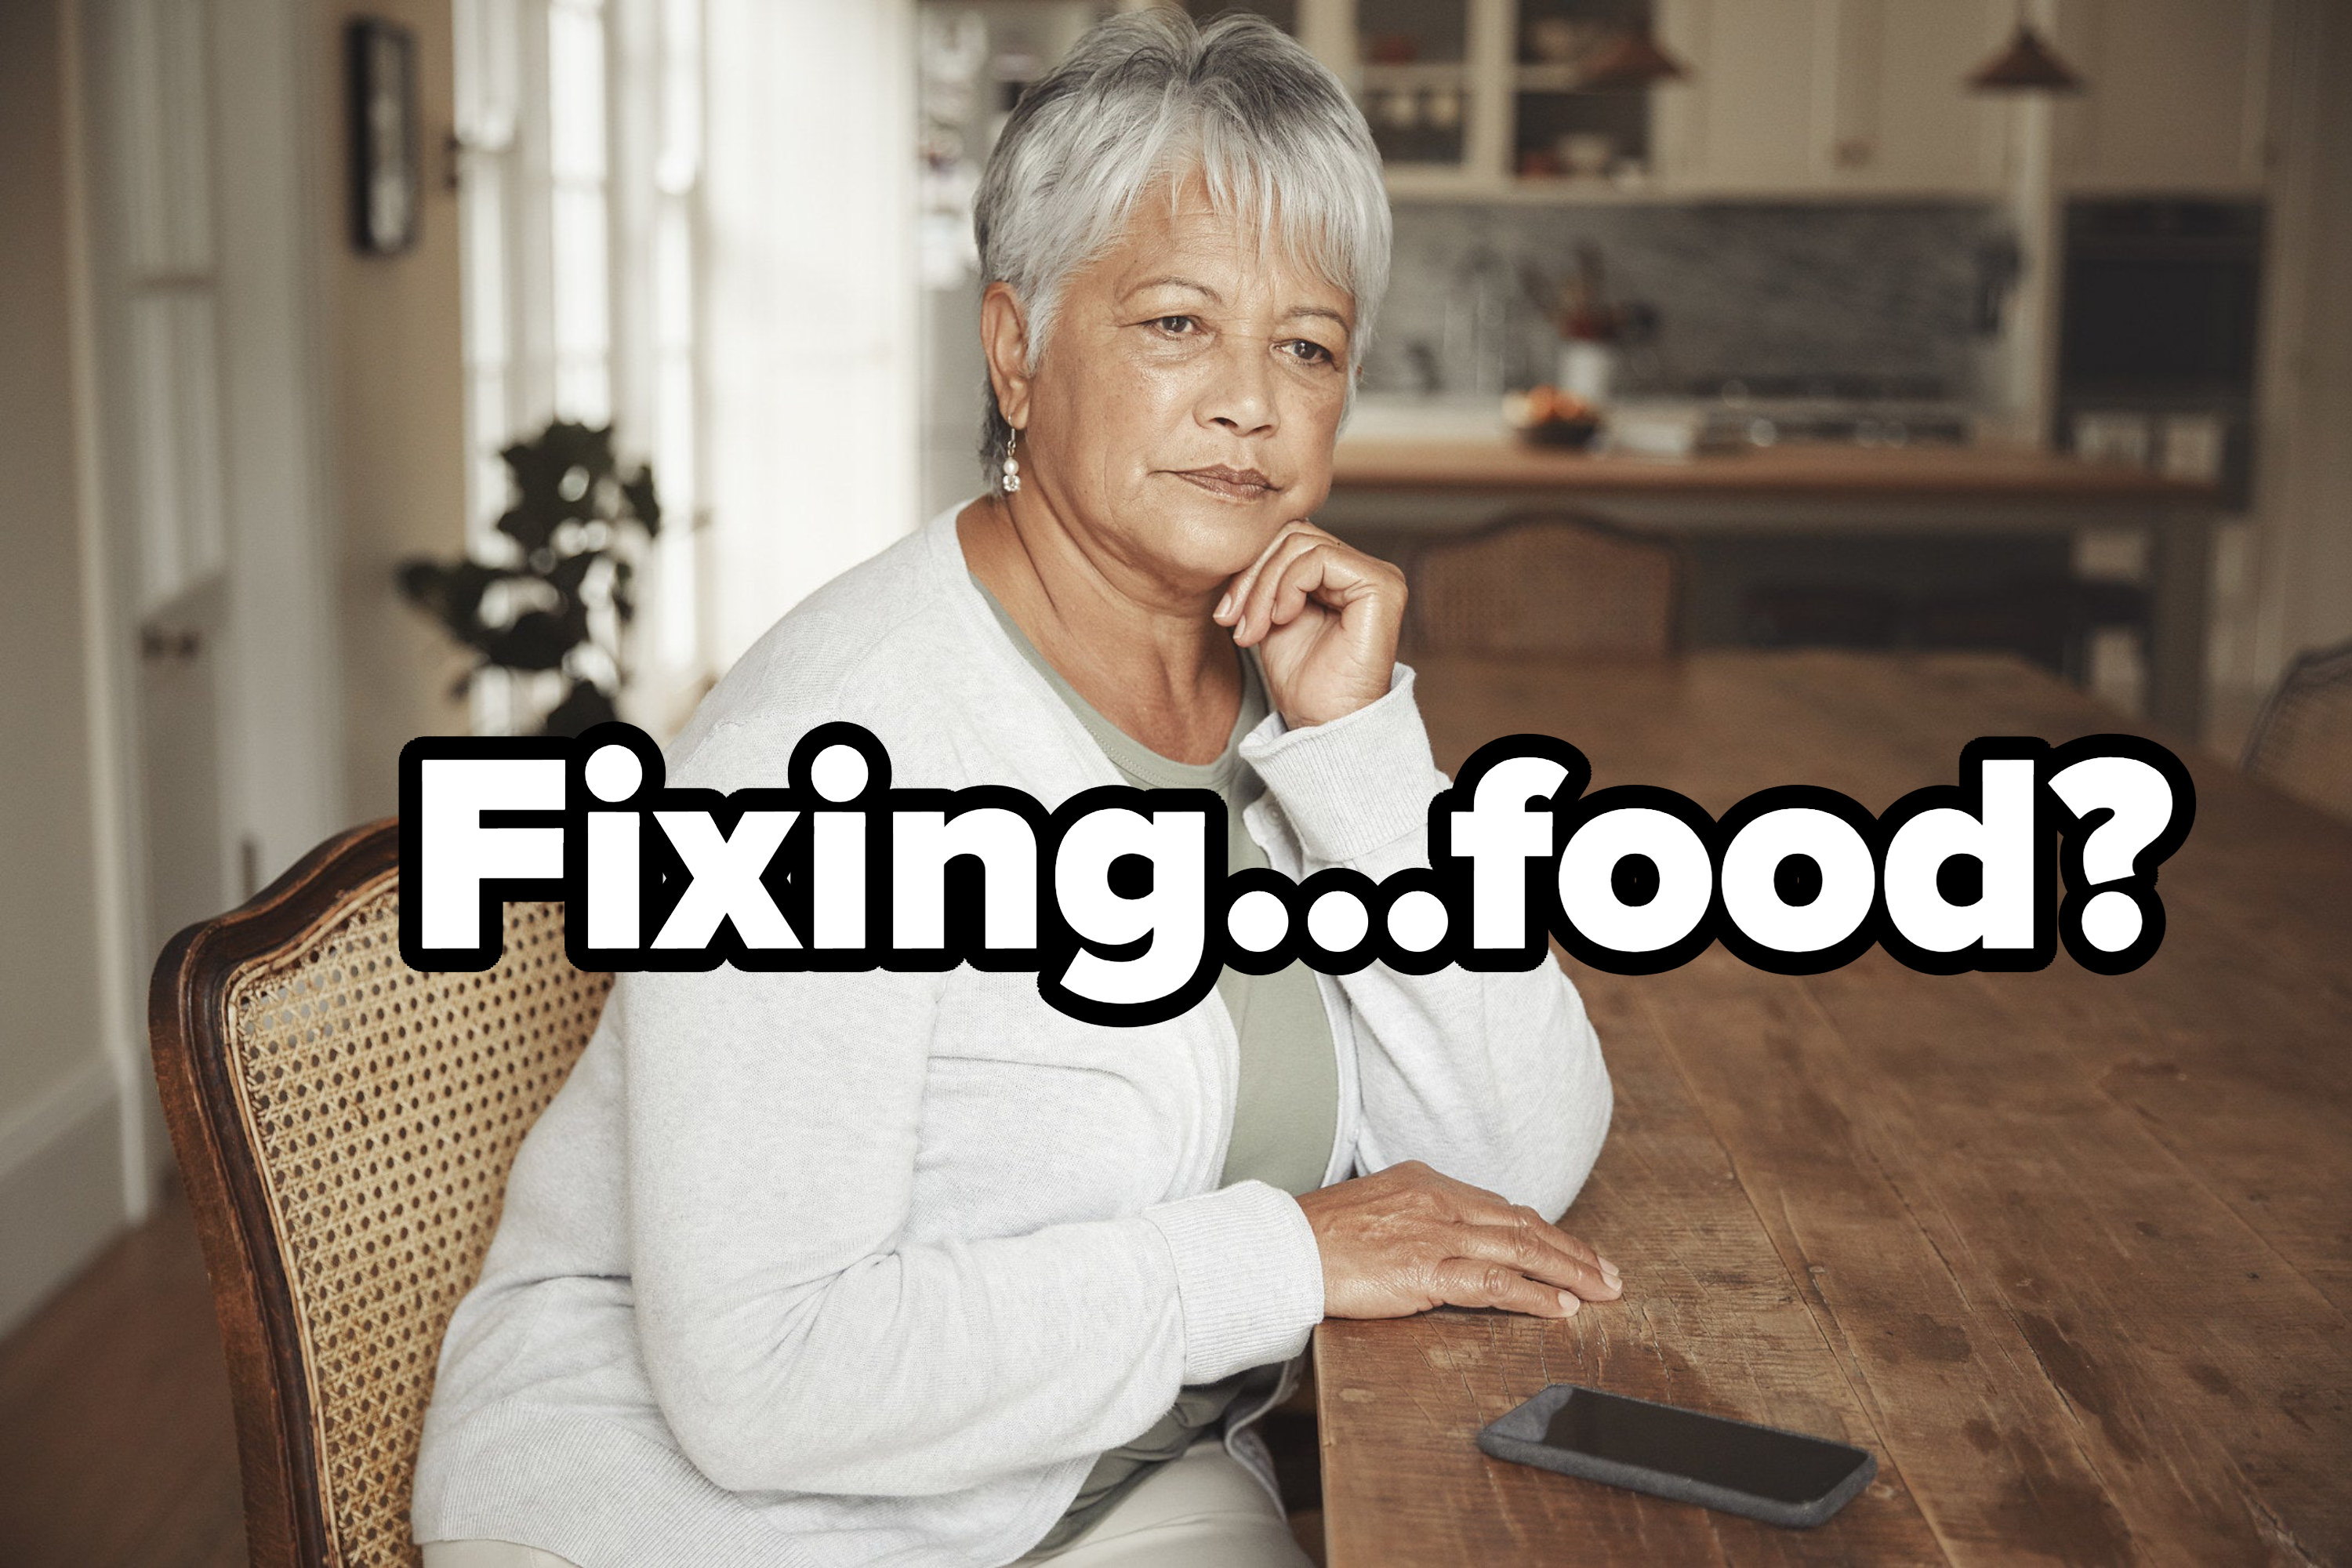 An older woman sitting at a table with her chin in her hand, with the caption &quot;Fixing...food?&quot;